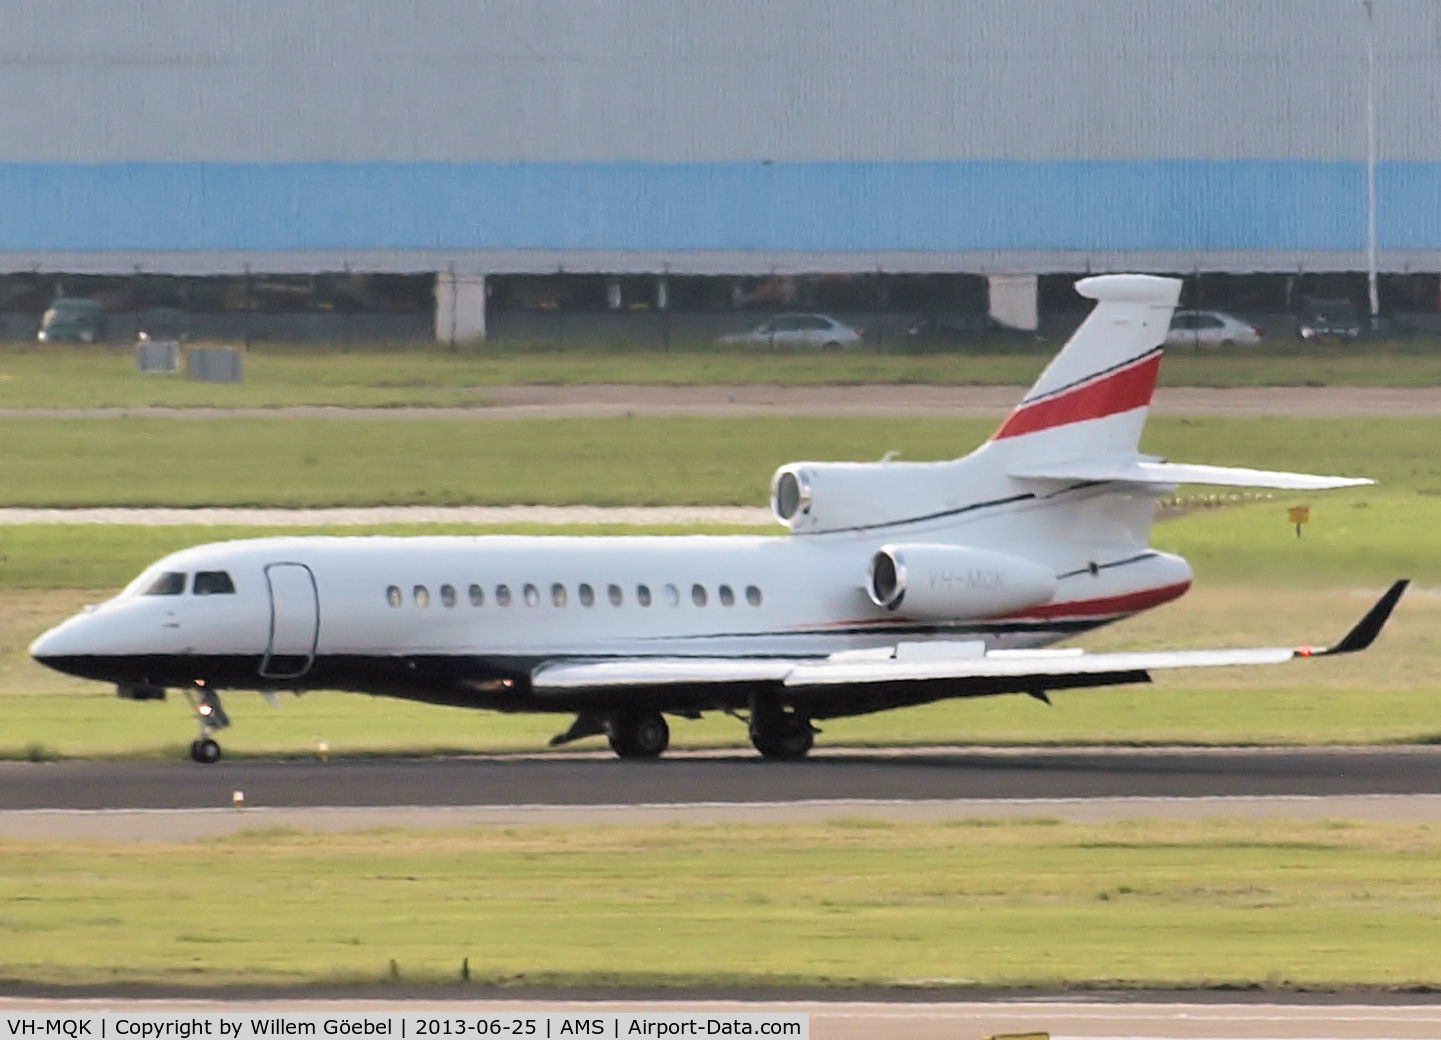 VH-MQK, 2012 Dassault Falcon 7X C/N 183, Arrival on Schiphol Airport